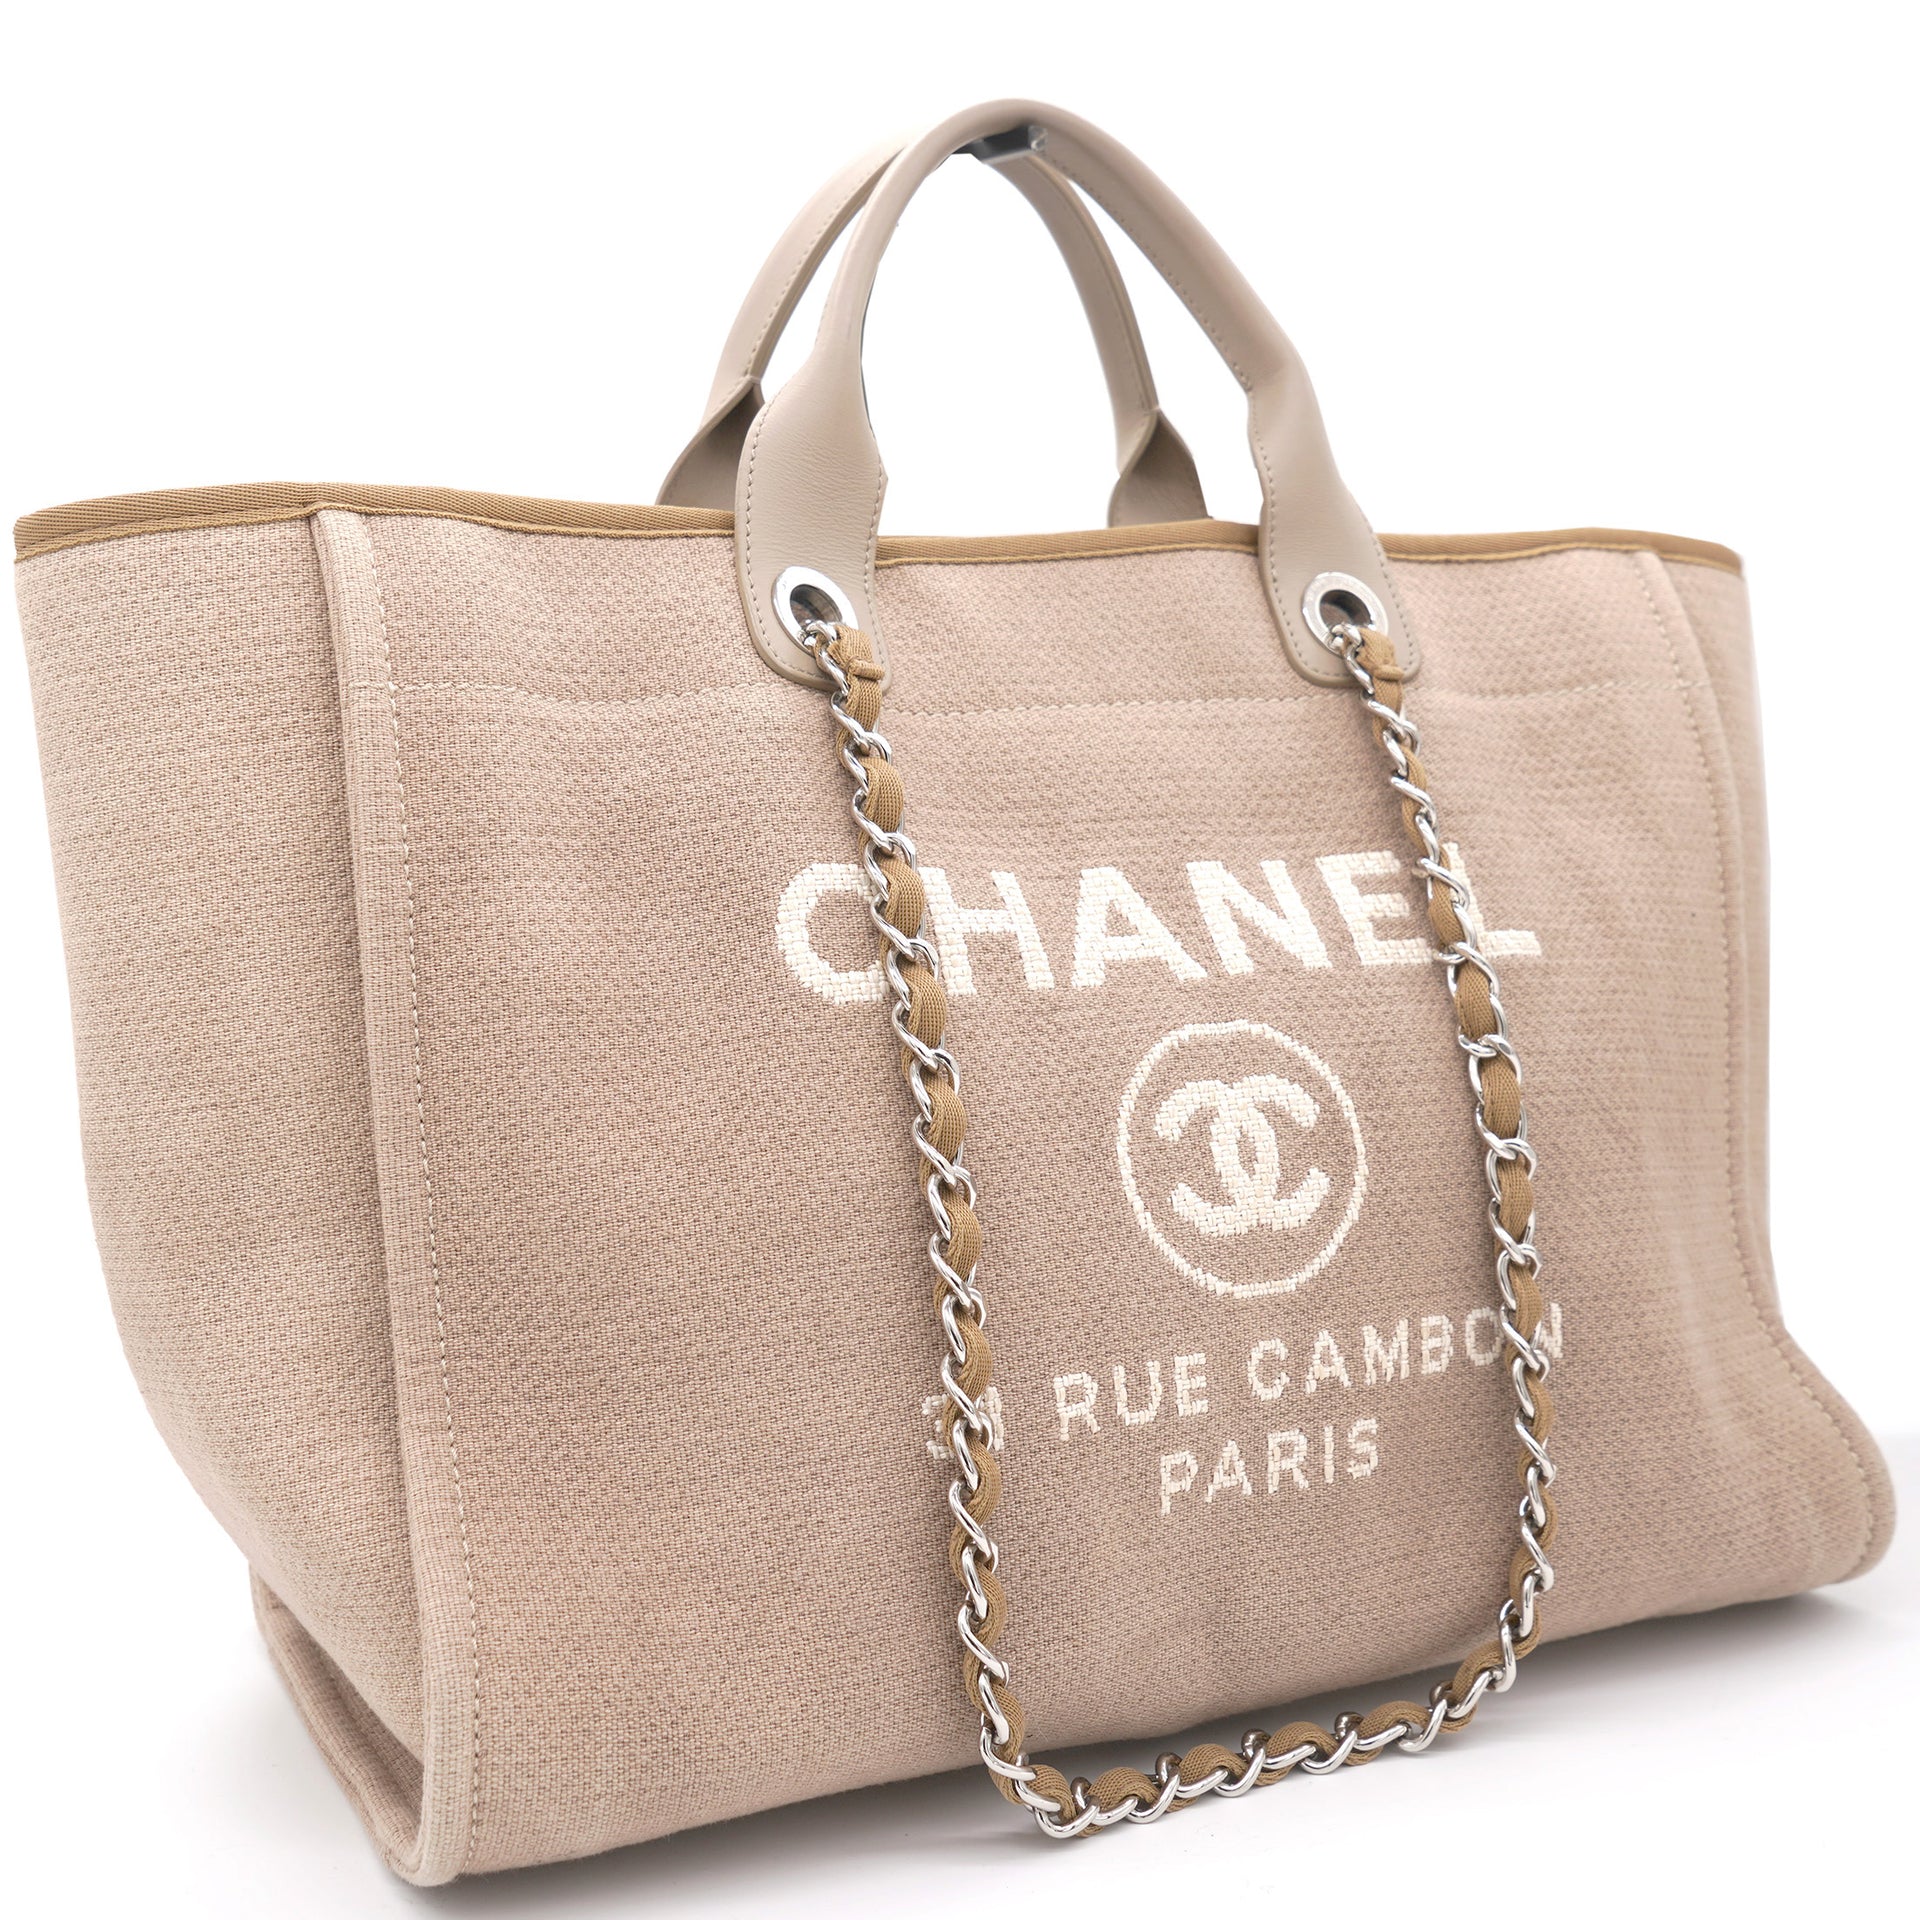 Chanel Deauville Tote Canvas Goldtone Small Beige in Canvas with Goldtone   US